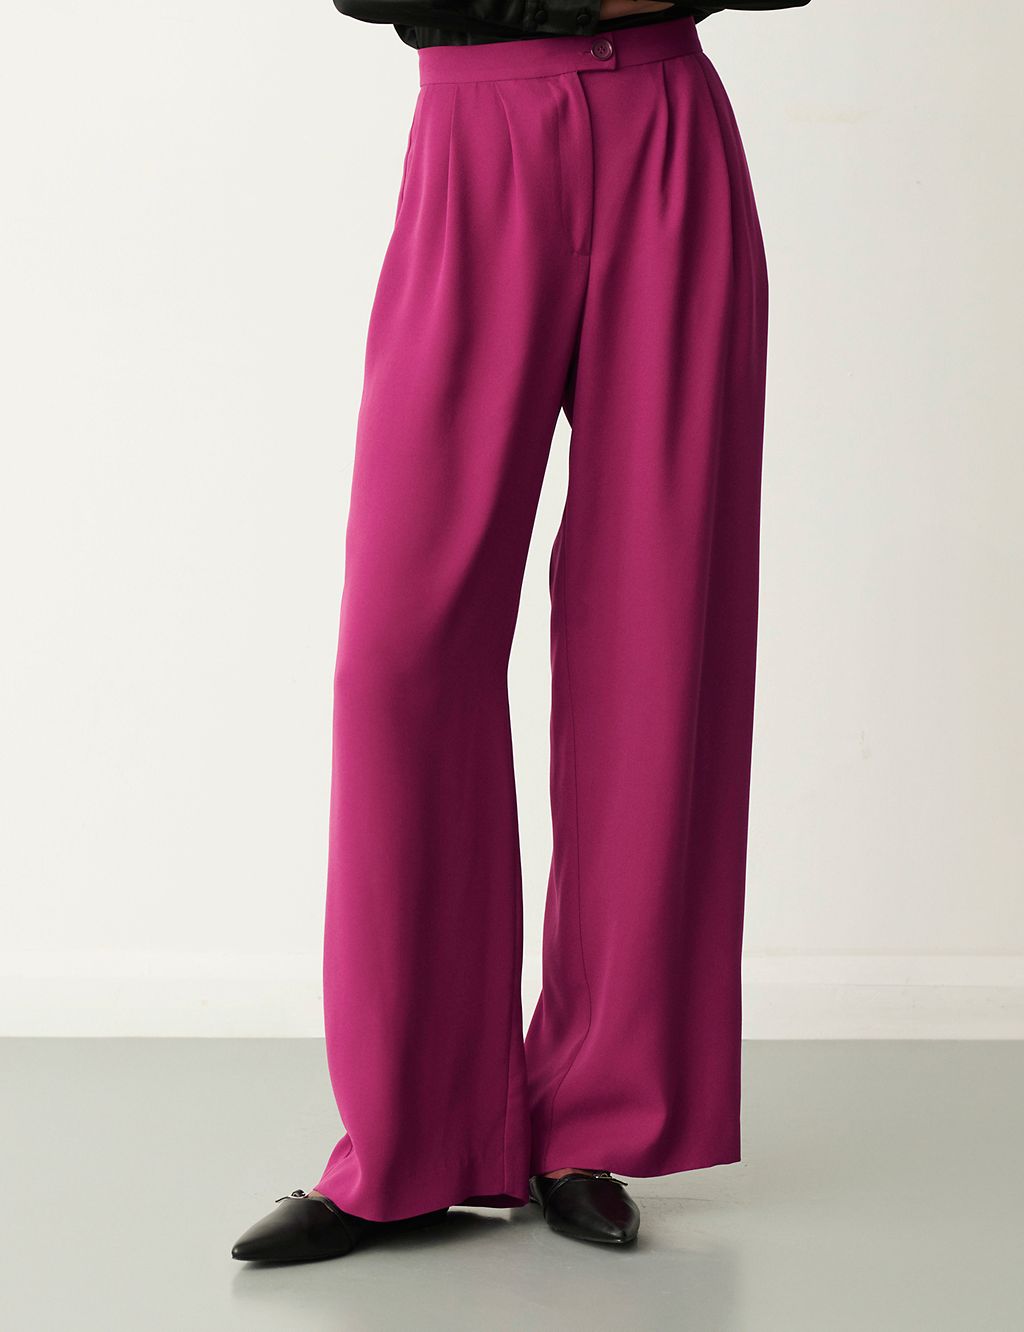 Pleat Front Wide Leg Trousers 1 of 3